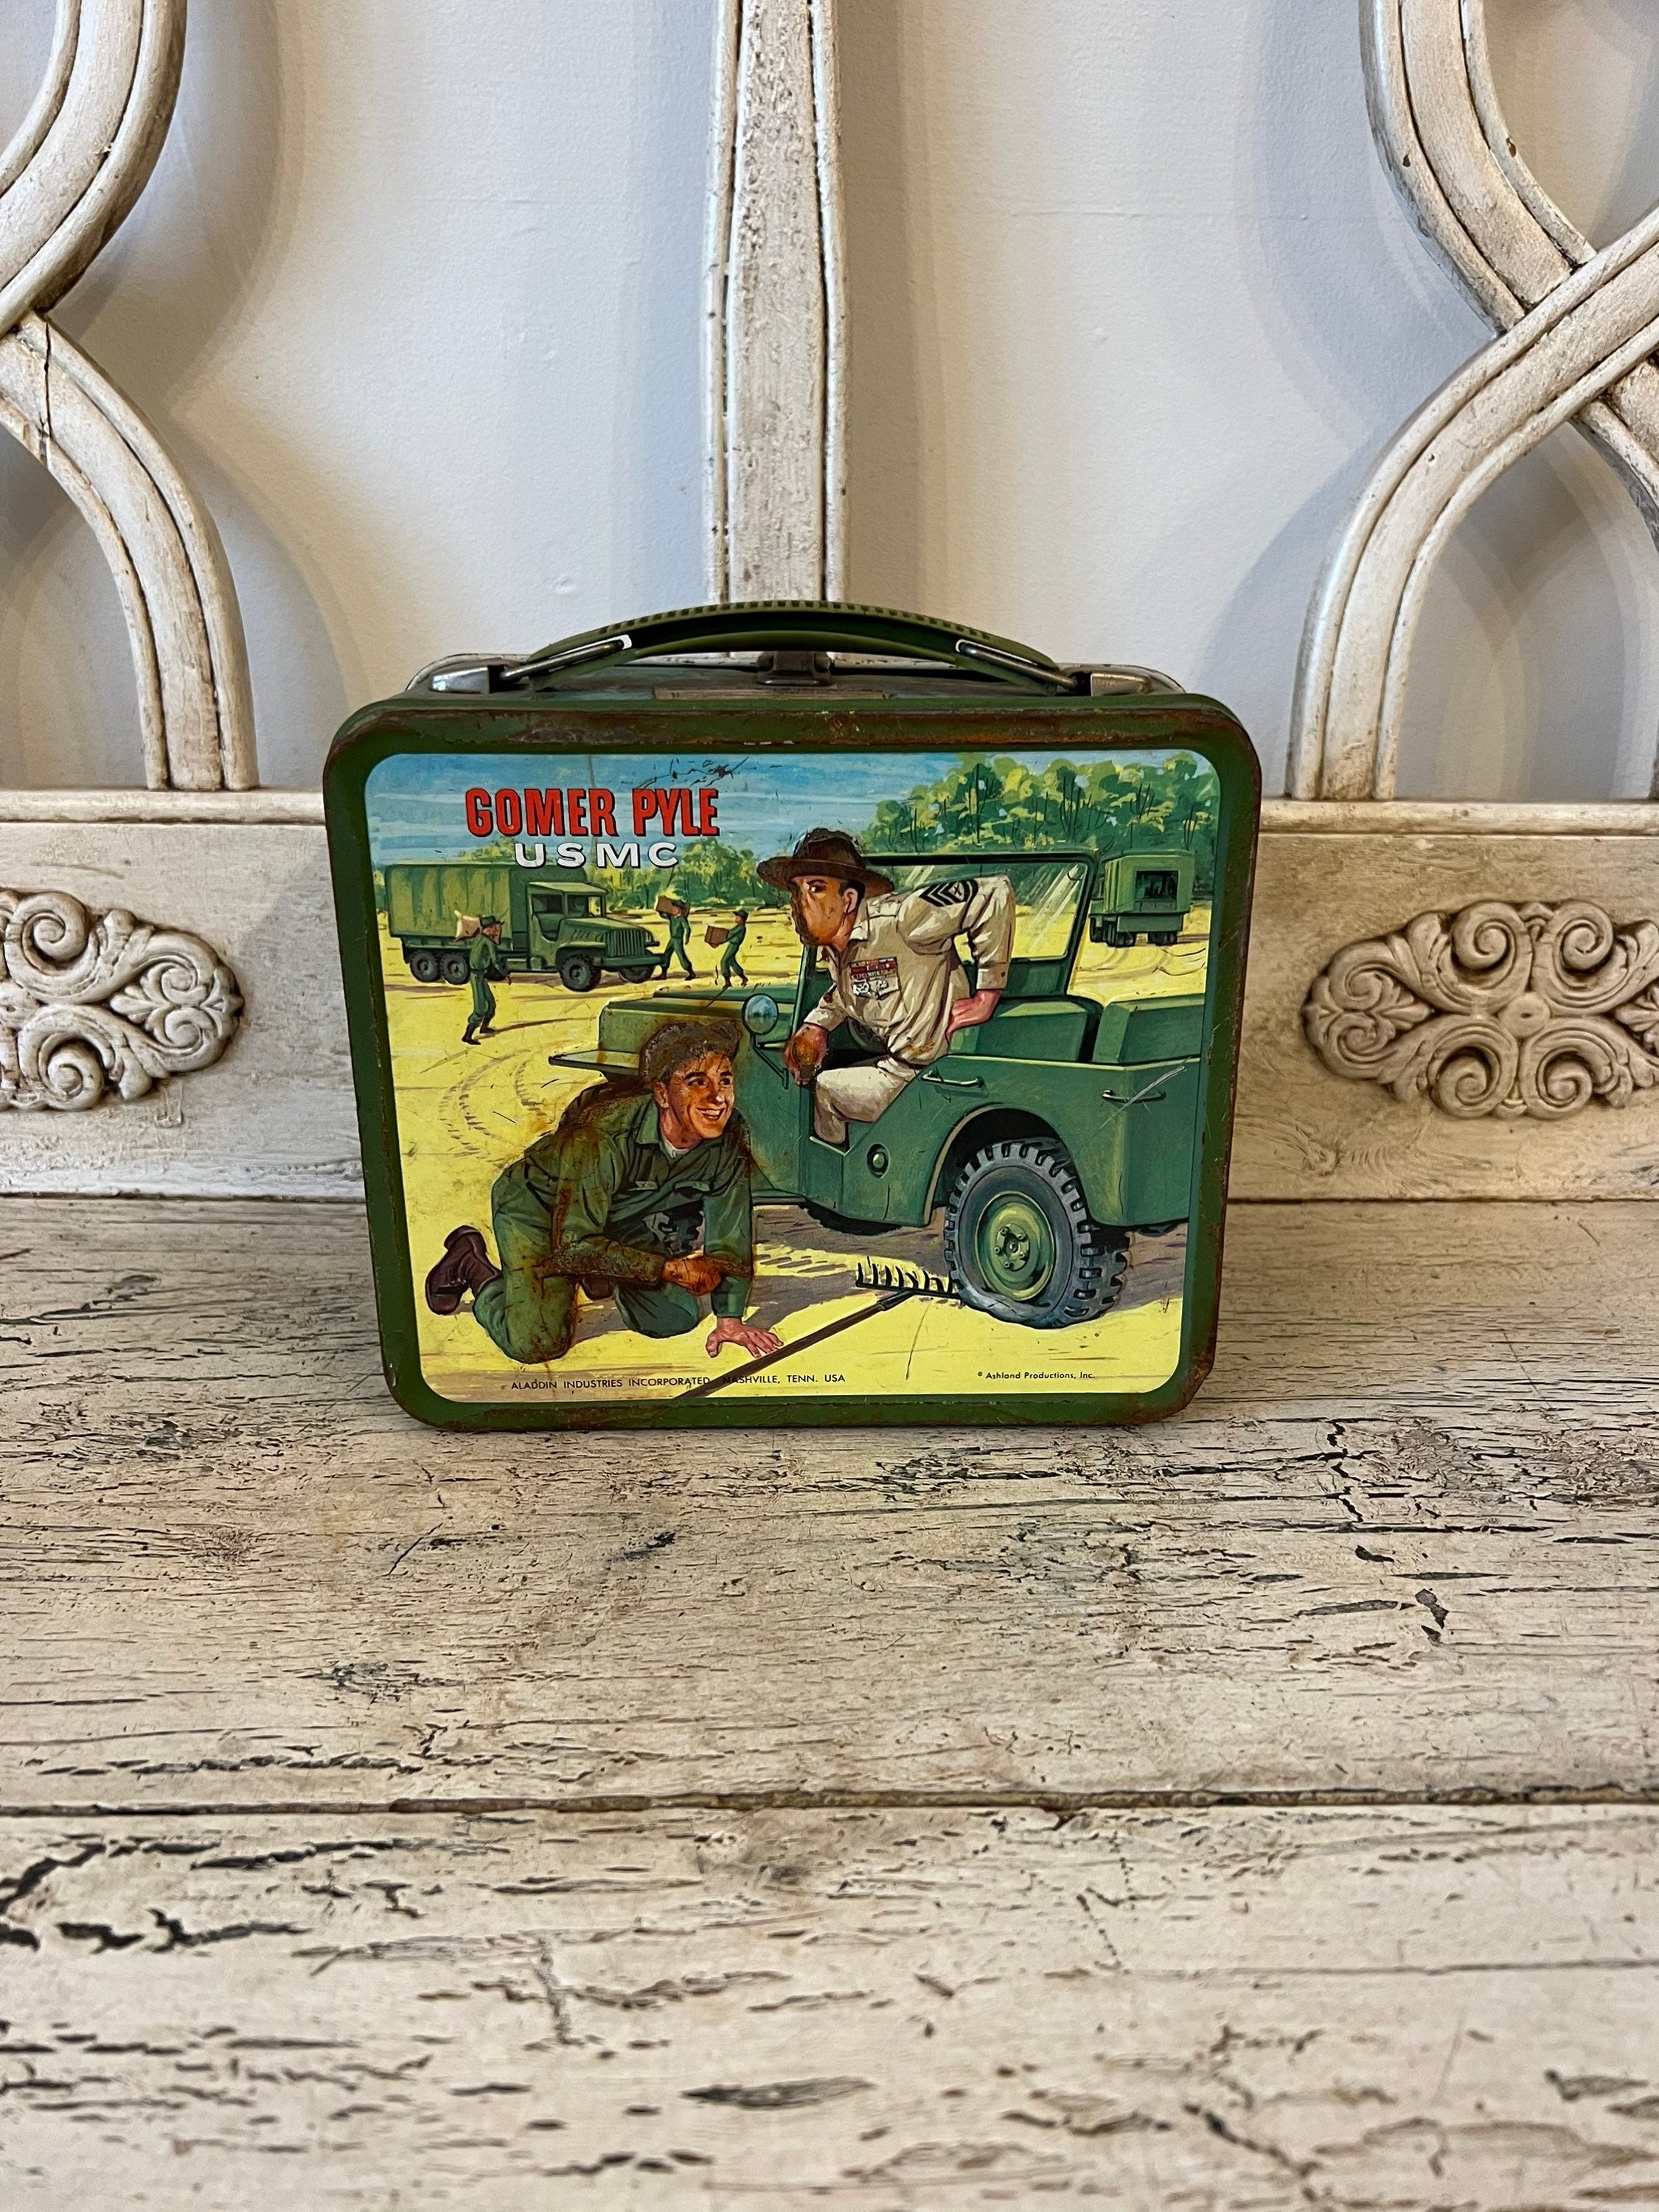 Vintage 1966 The Man From UNCLE Metal Lunch Box And Thermos